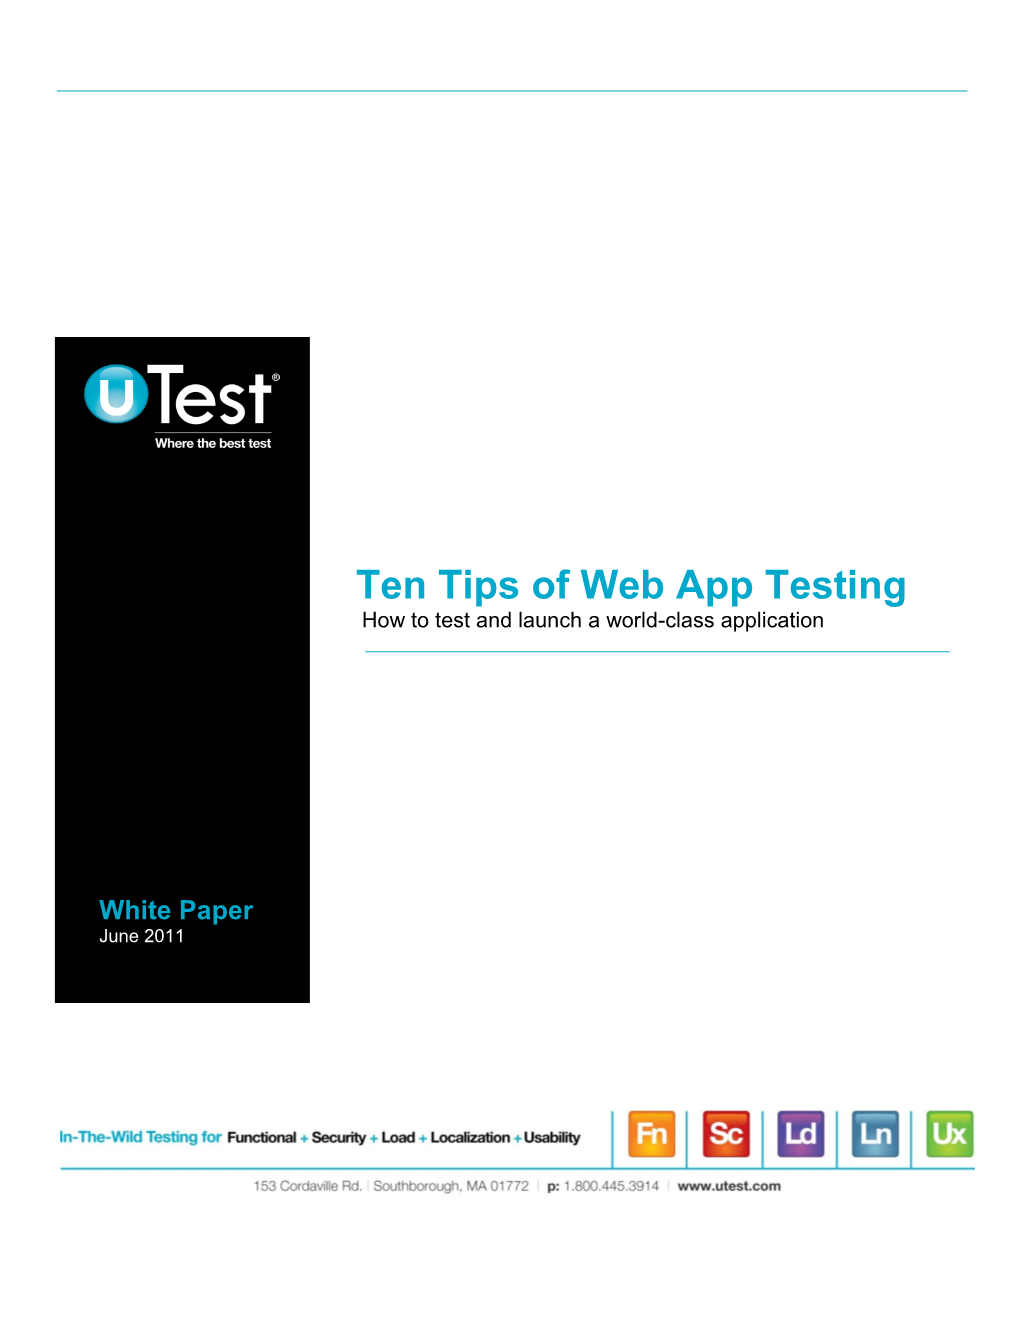 Ten Tips of Web App Testing How to Test and Launch a World-Class Application